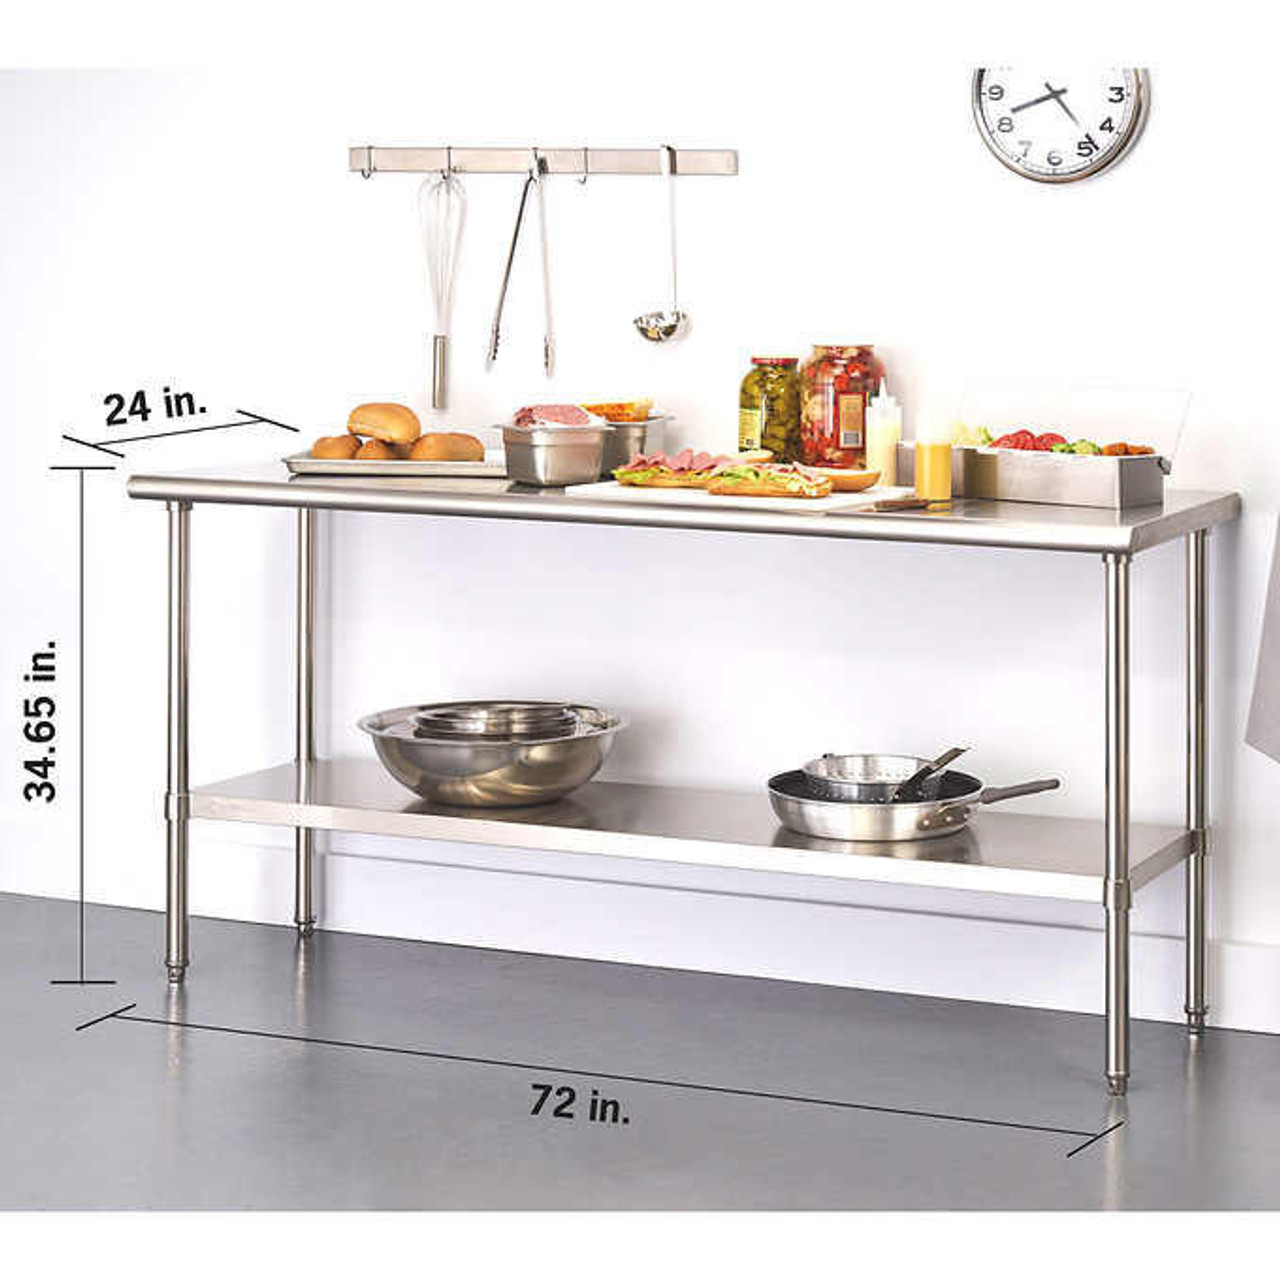 TRINITY EcoStorage Stainless-Steel 182.8 cm (72 in.) Table - Versatile and Durable Workspace Solution- Chicken Pieces